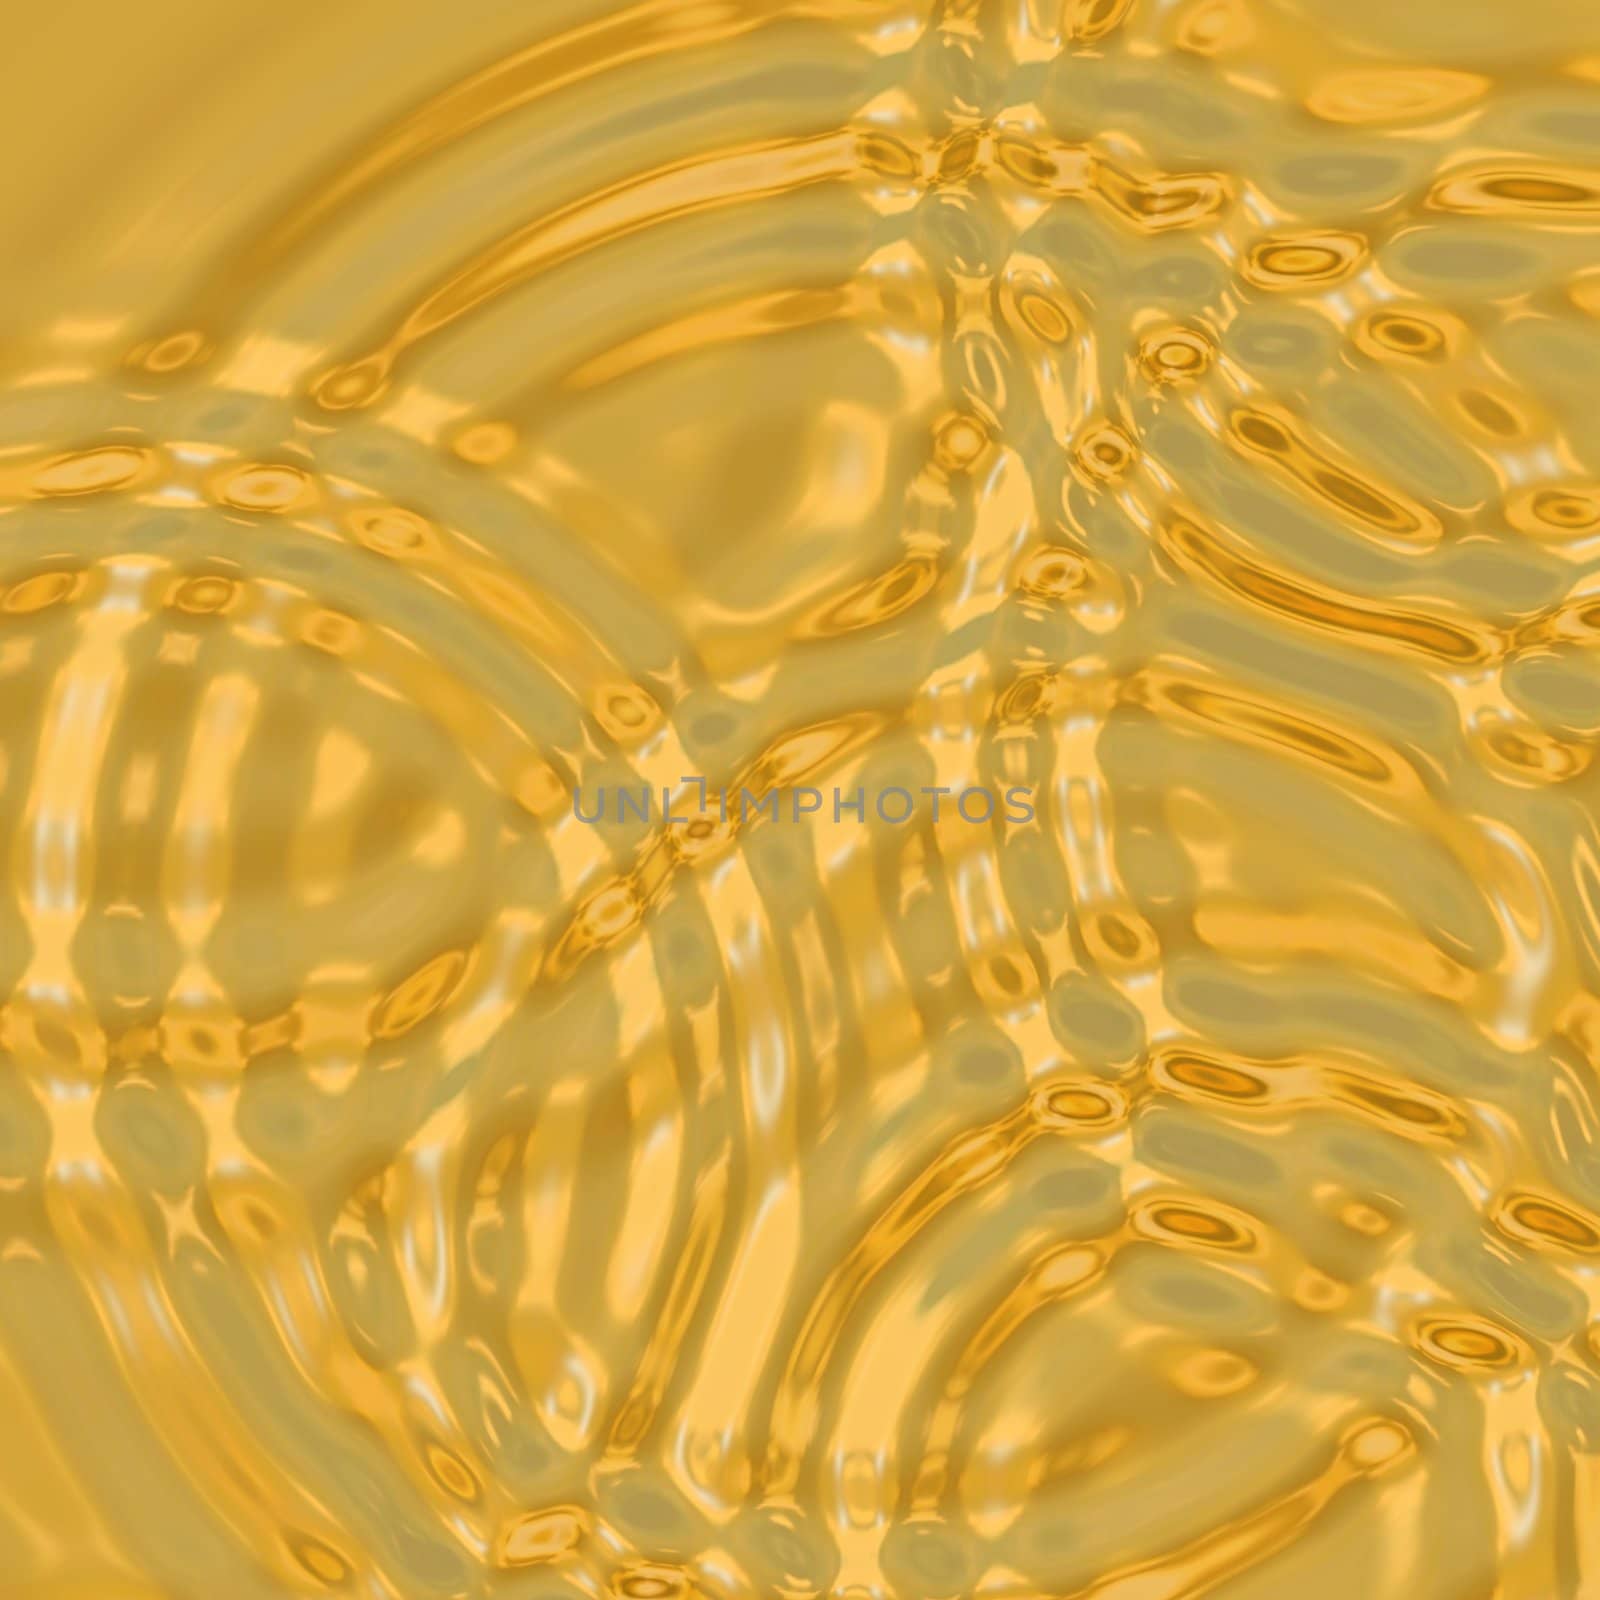 a nice large image of ripples and waves in molten gold